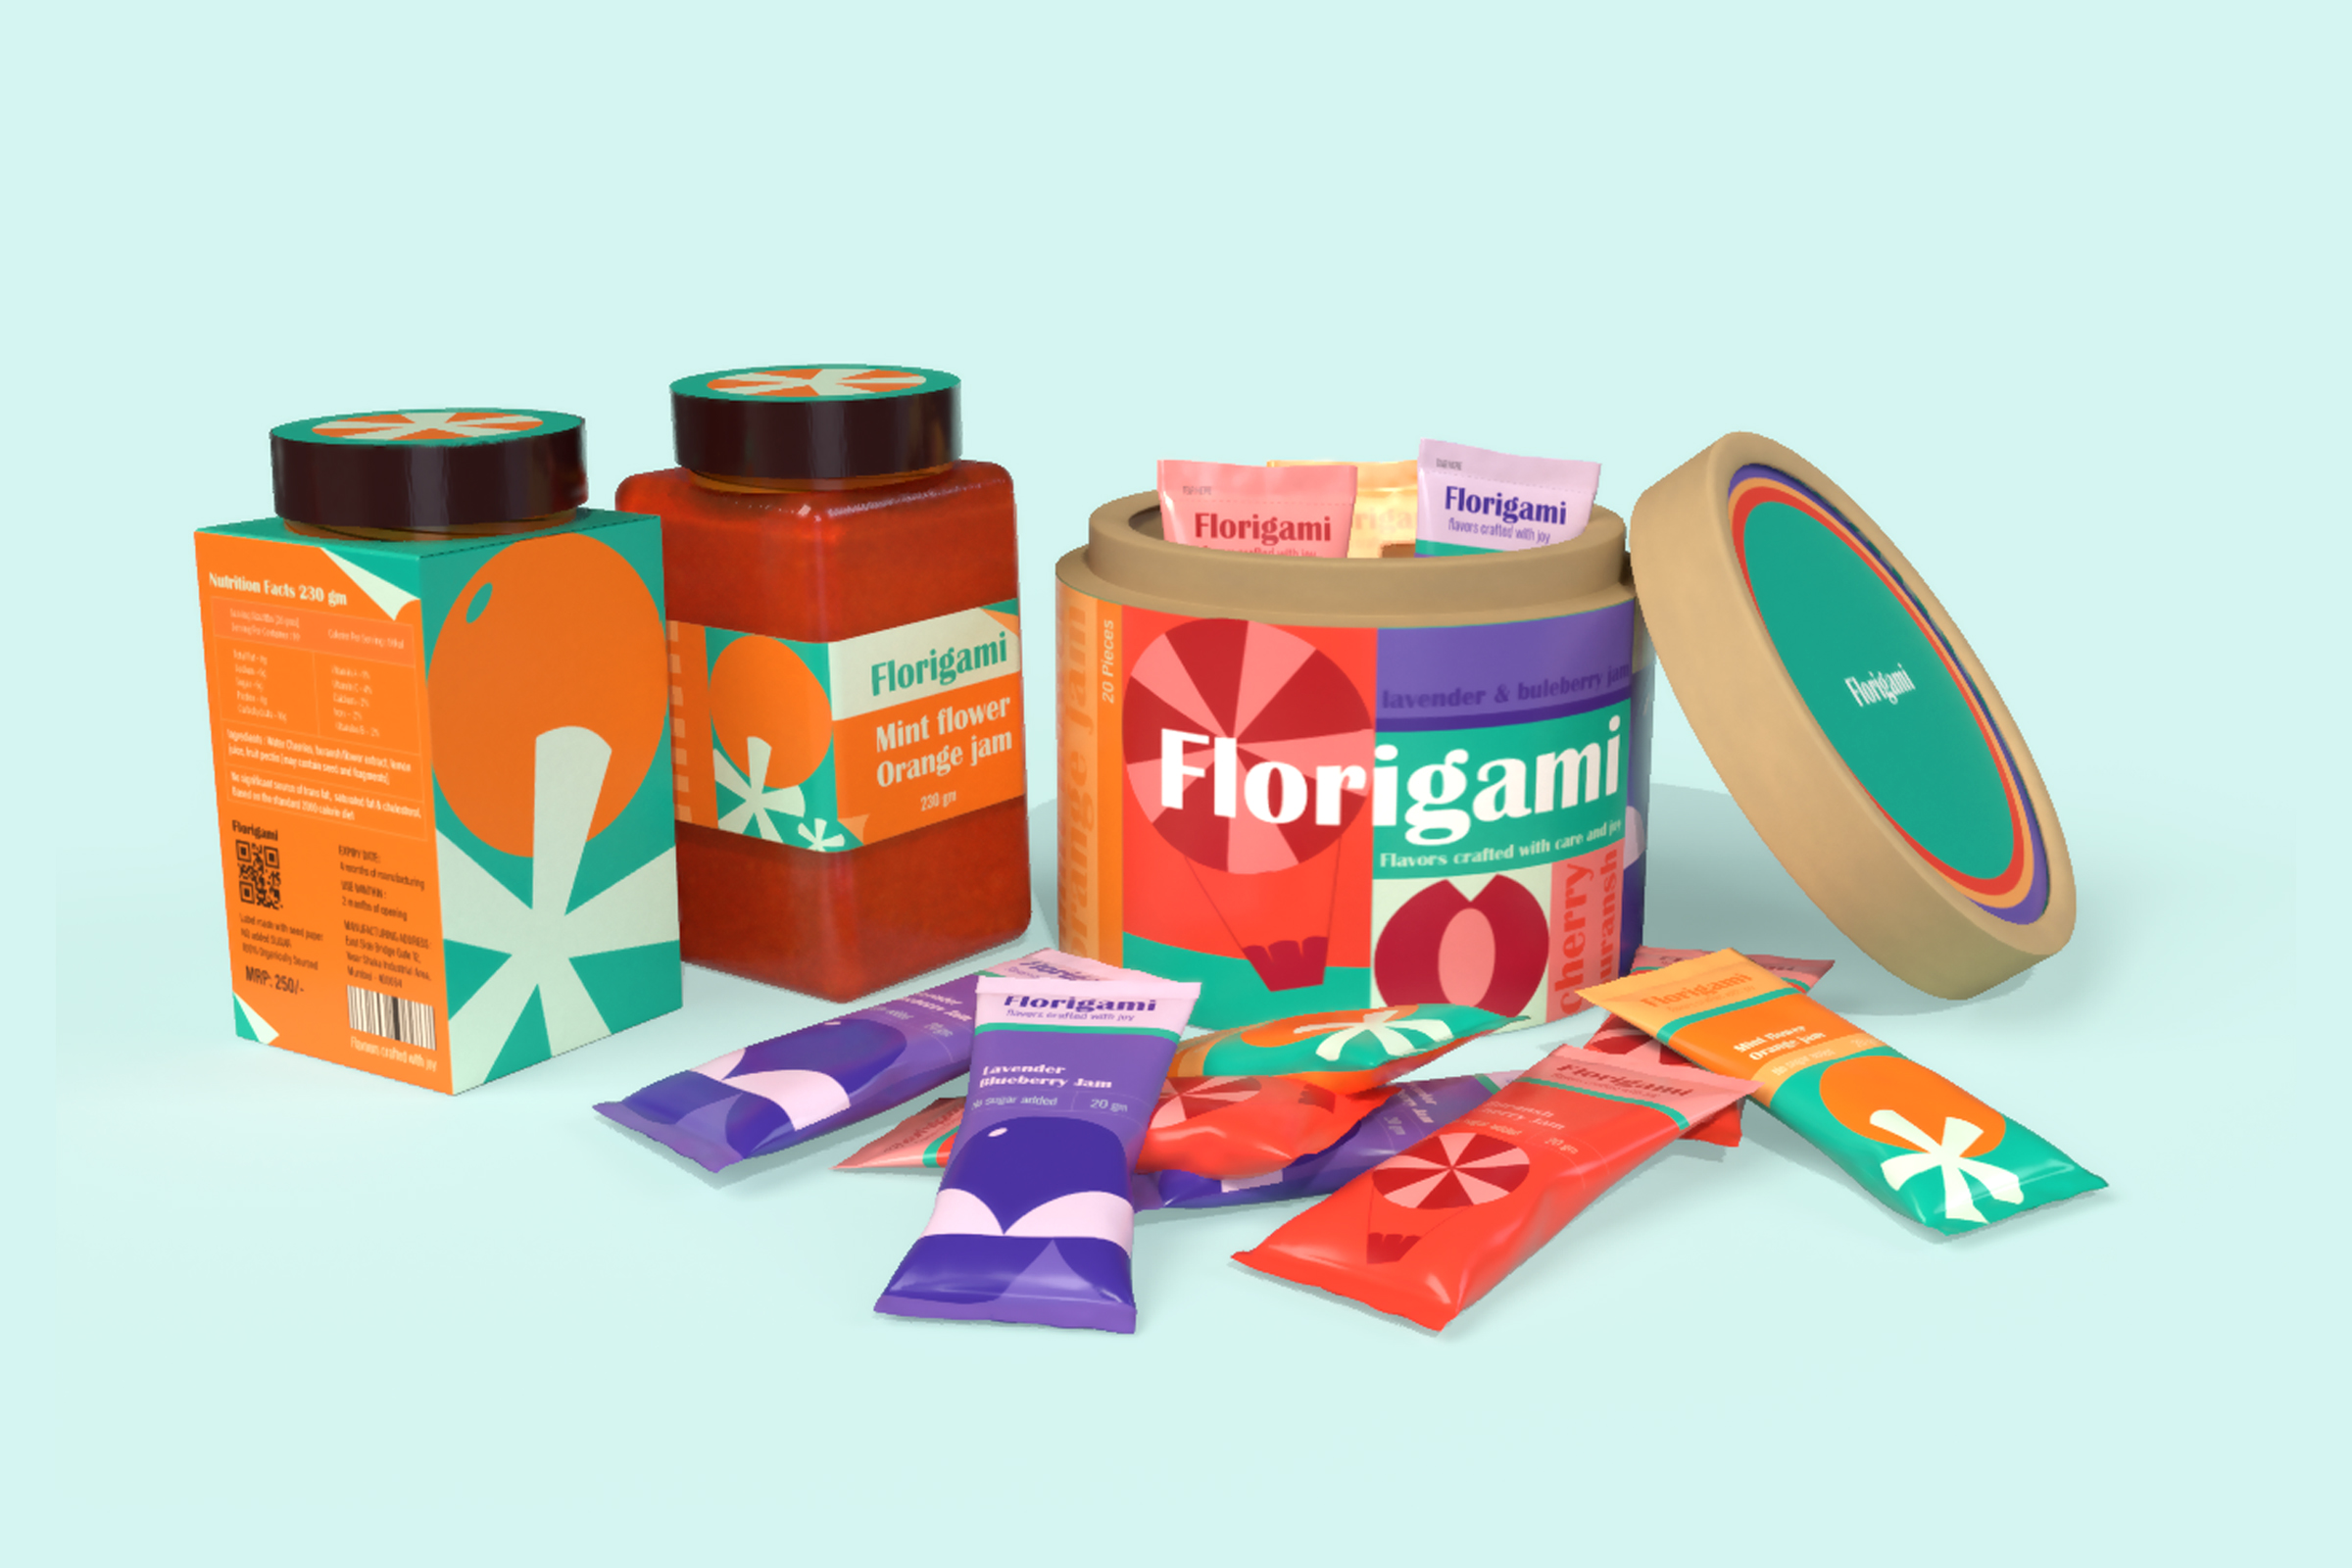 Student Brand and Packaging Design Concept for Florigami Fower and Fruit Fusion Jams